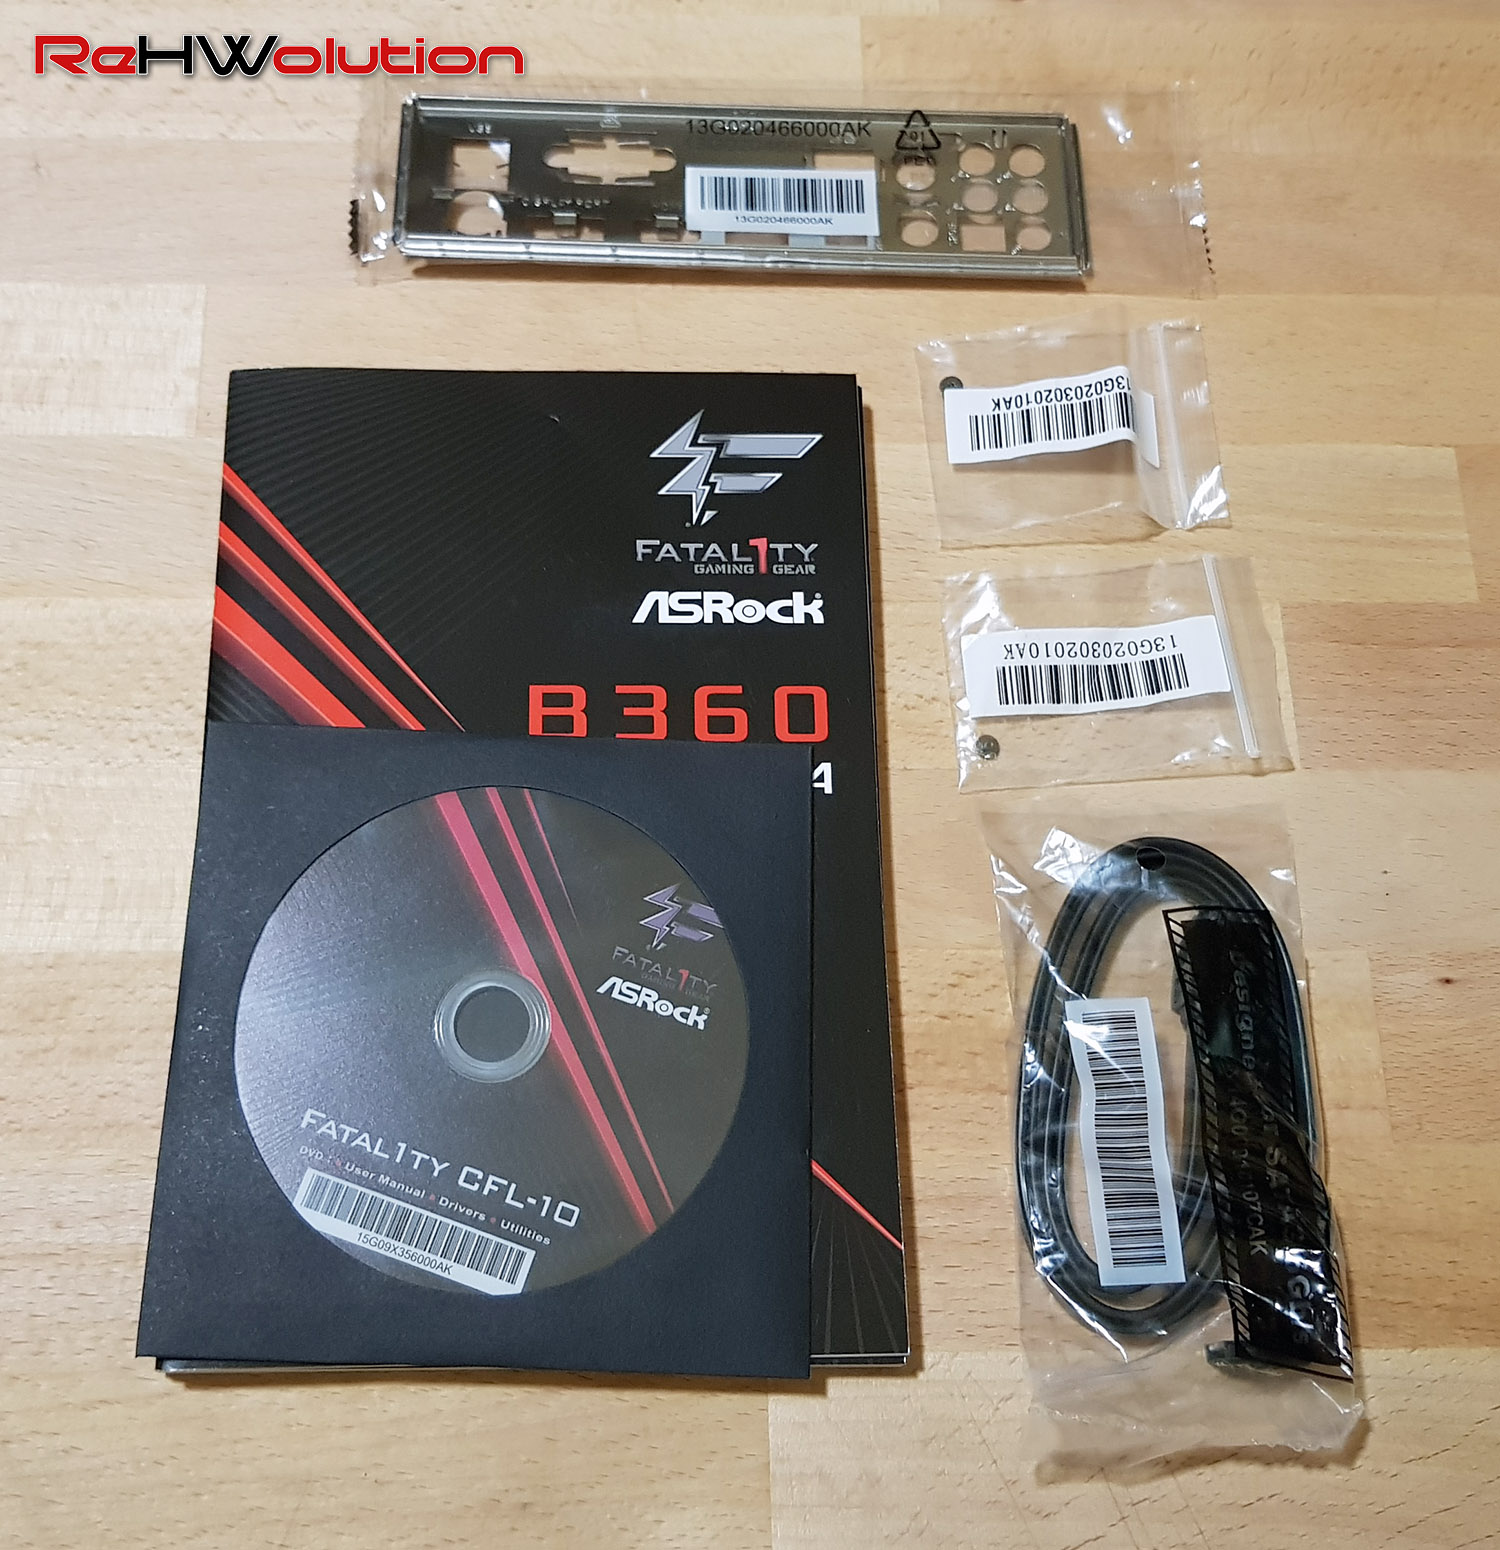 Asrock Fatal1ty H370 Performance E 60 Gaming K4 Rehwolution